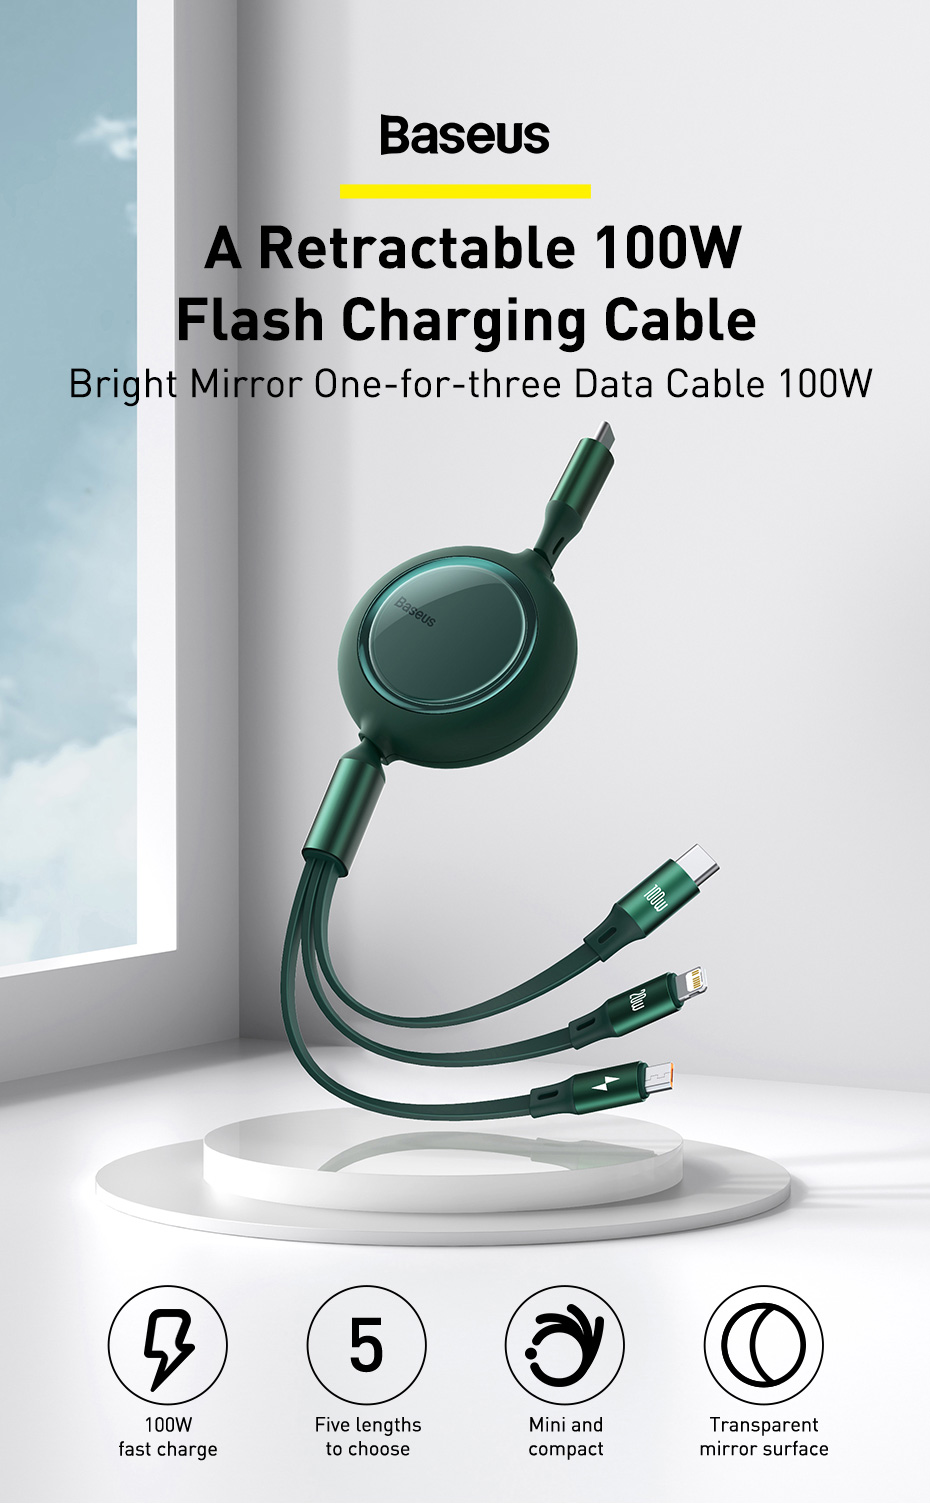 Baseus-100W-3-In-1-Retractable-Cable-Type-C-to-Type-C--Micro-USB--for-Lightning-Fast-Charging-480Mbp-1857213-1